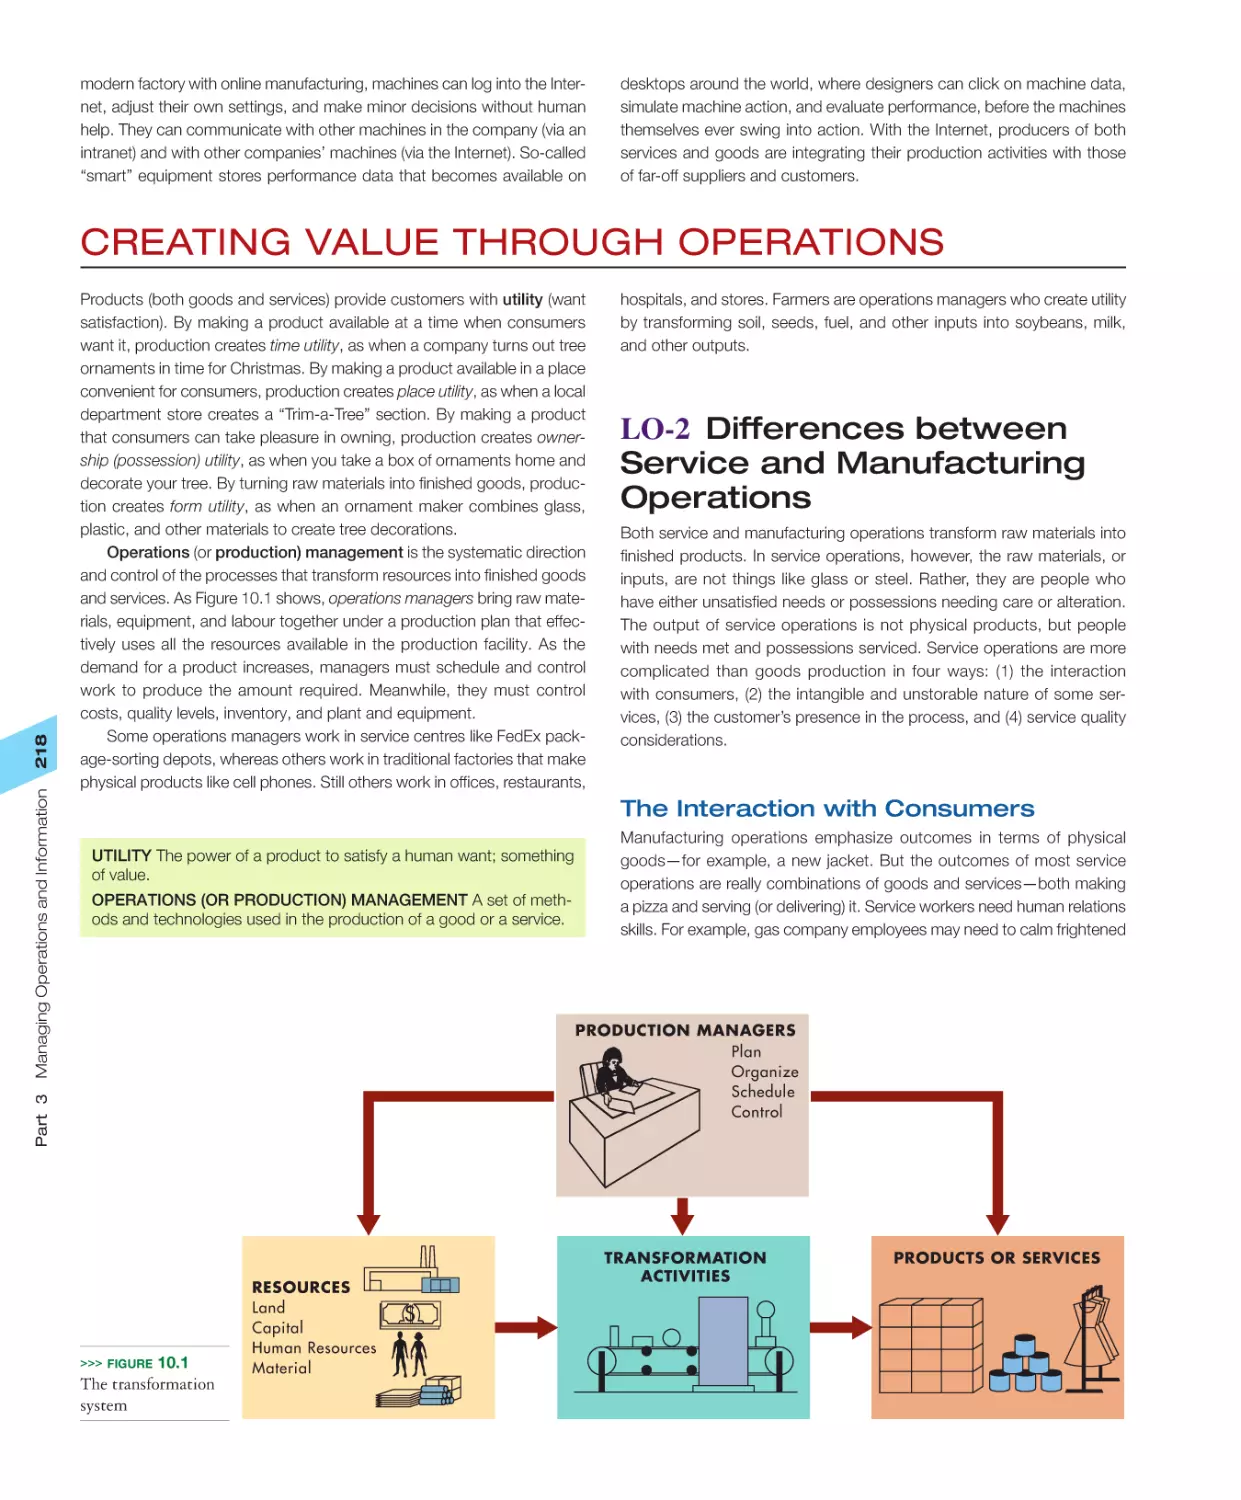 Creating Value through Operations
LO‐2 Differences between Service and Manufacturing Operations